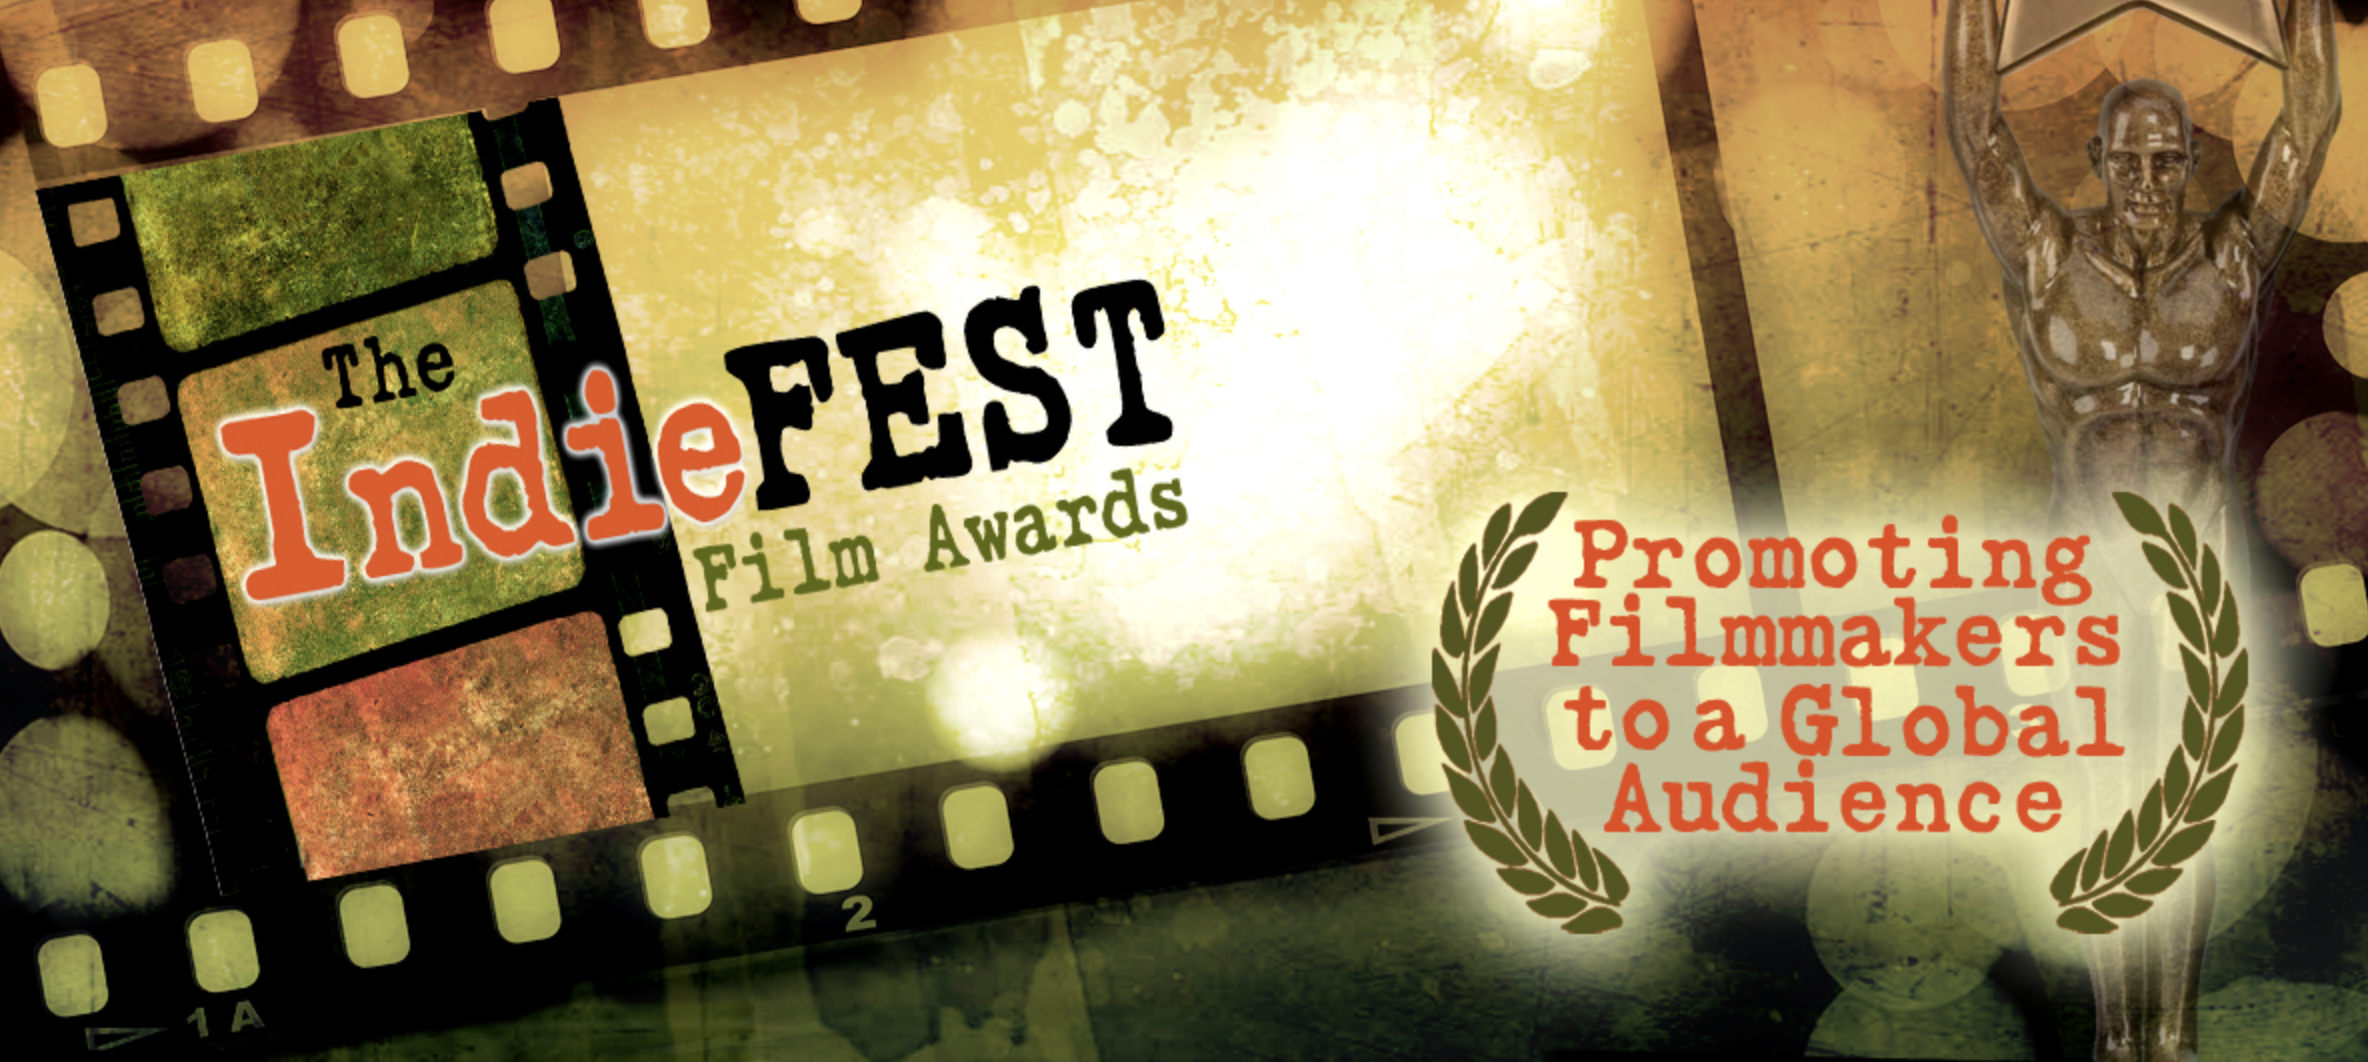 the IndieFest Film Awards